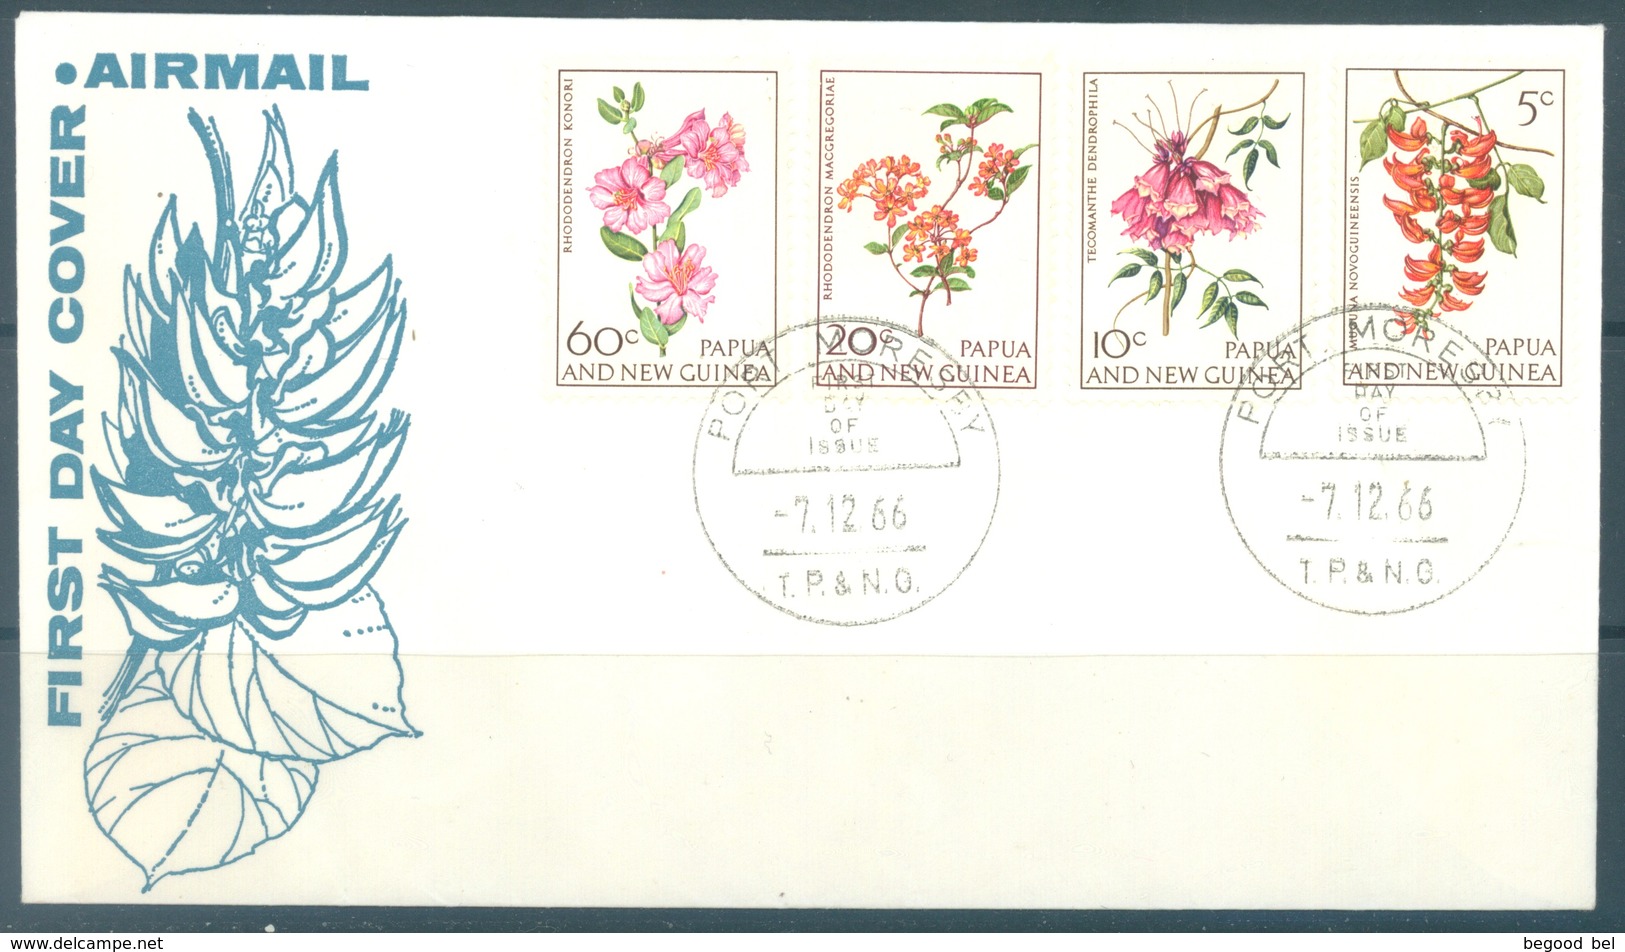 PAPUA NEW GUINEA - FDC  - 7.12.1966 - FLOWERS - Yv 101-104 -  Lot 17695 - Papouasie-Nouvelle-Guinée